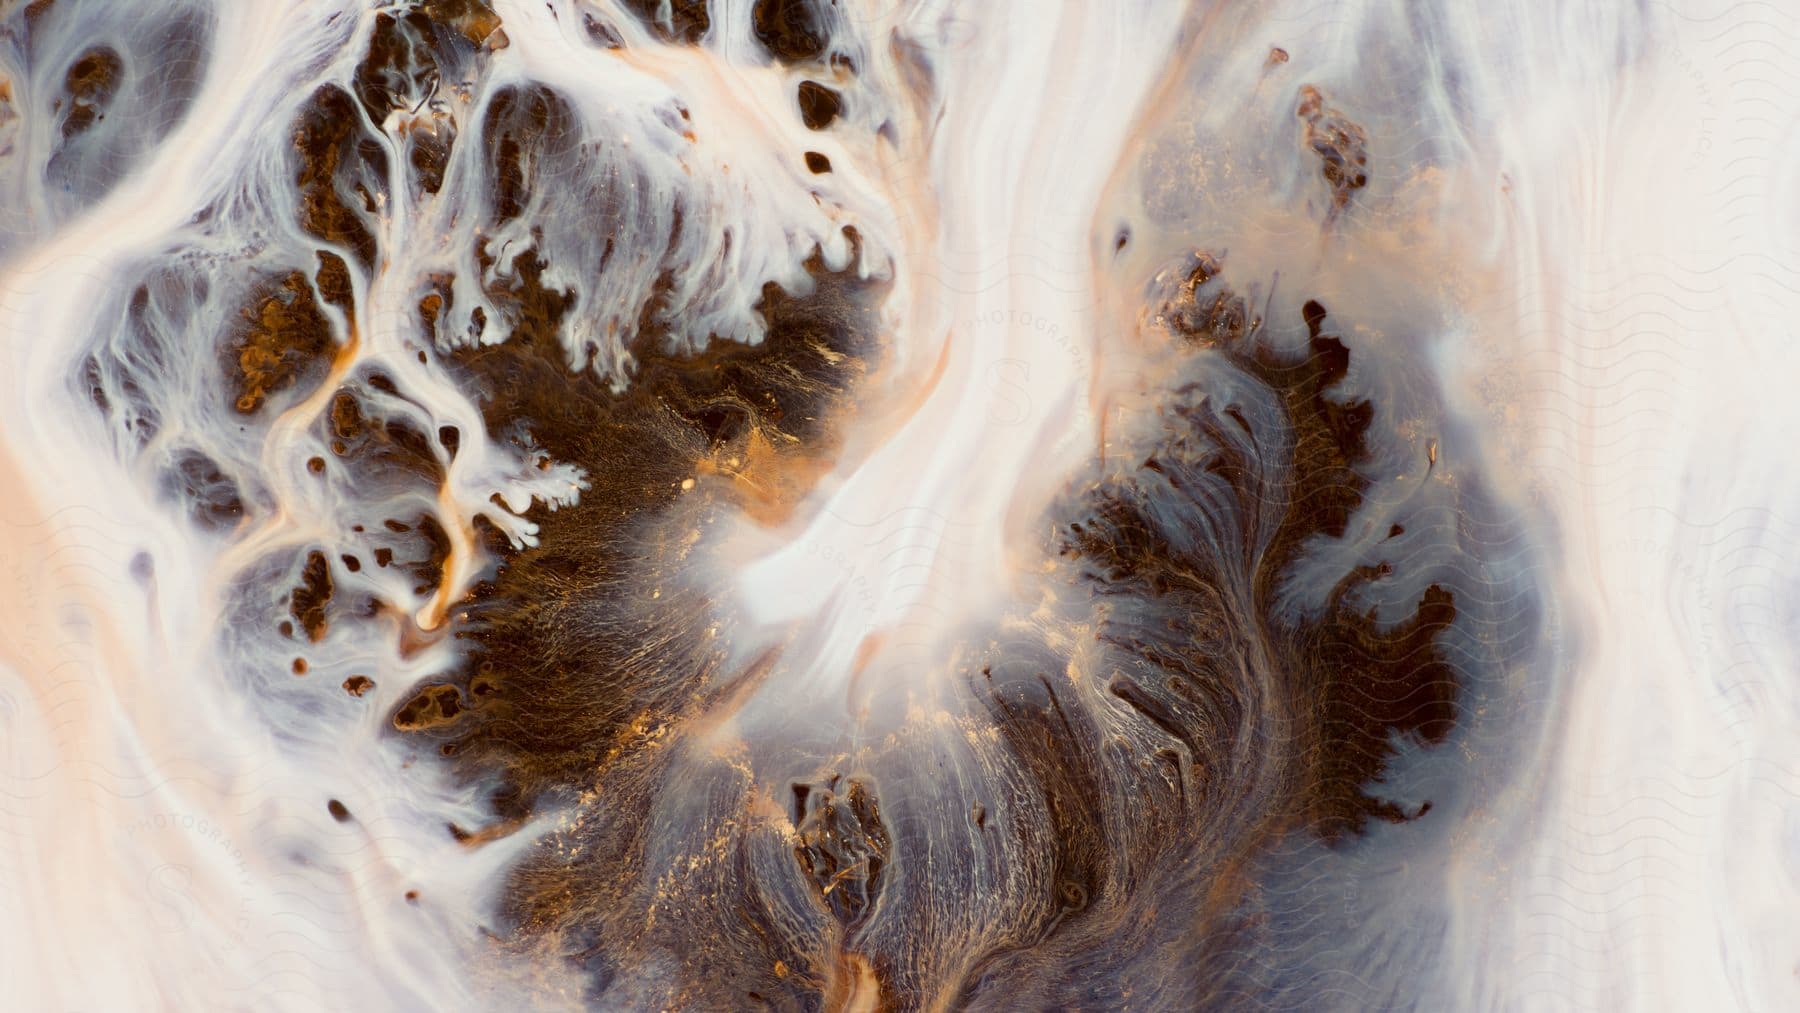 Abstract brown liquid flowing in a closeup view